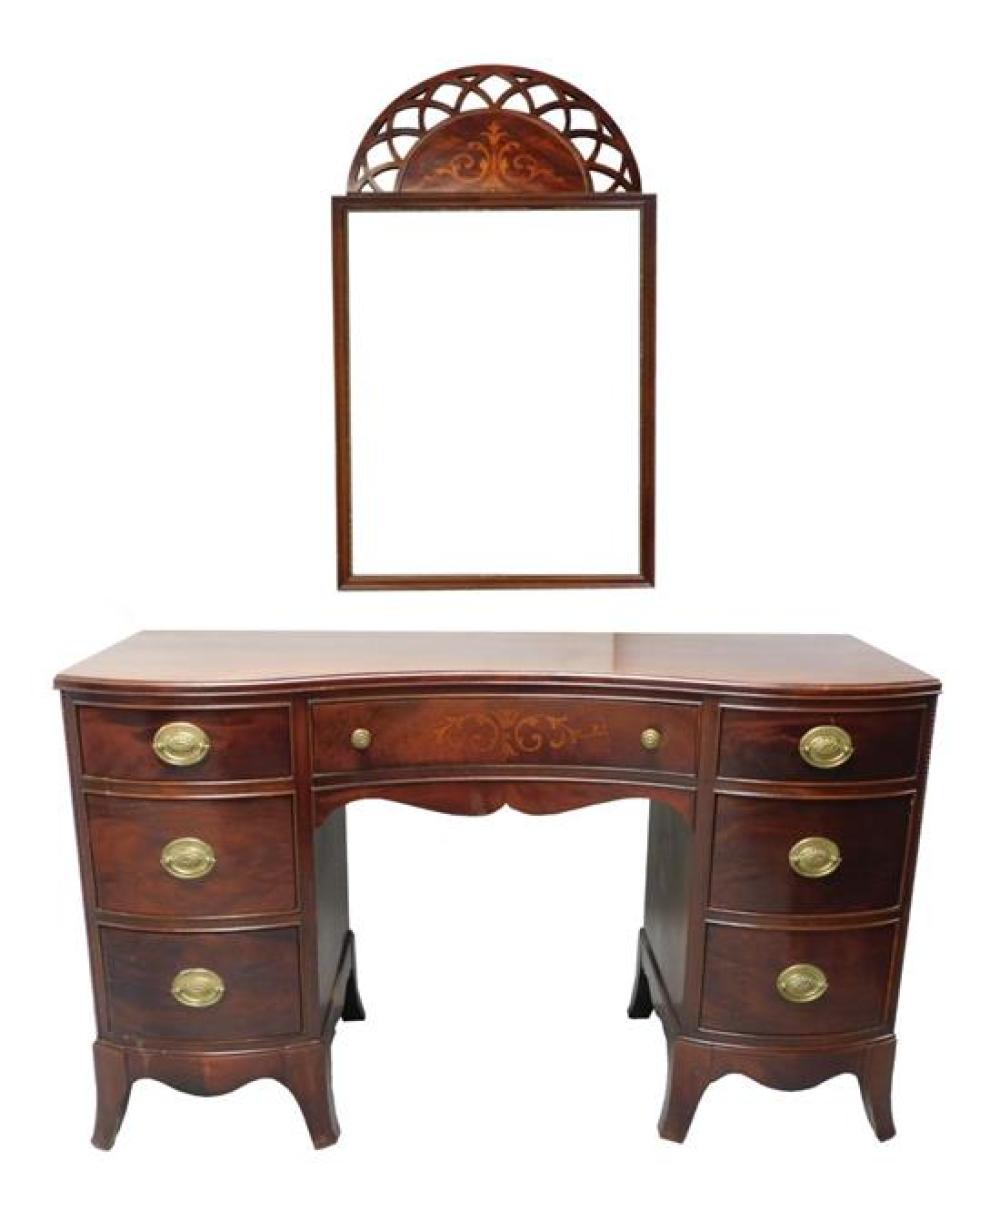 LADY'S TWO PIECE VANITY, AMERICAN,